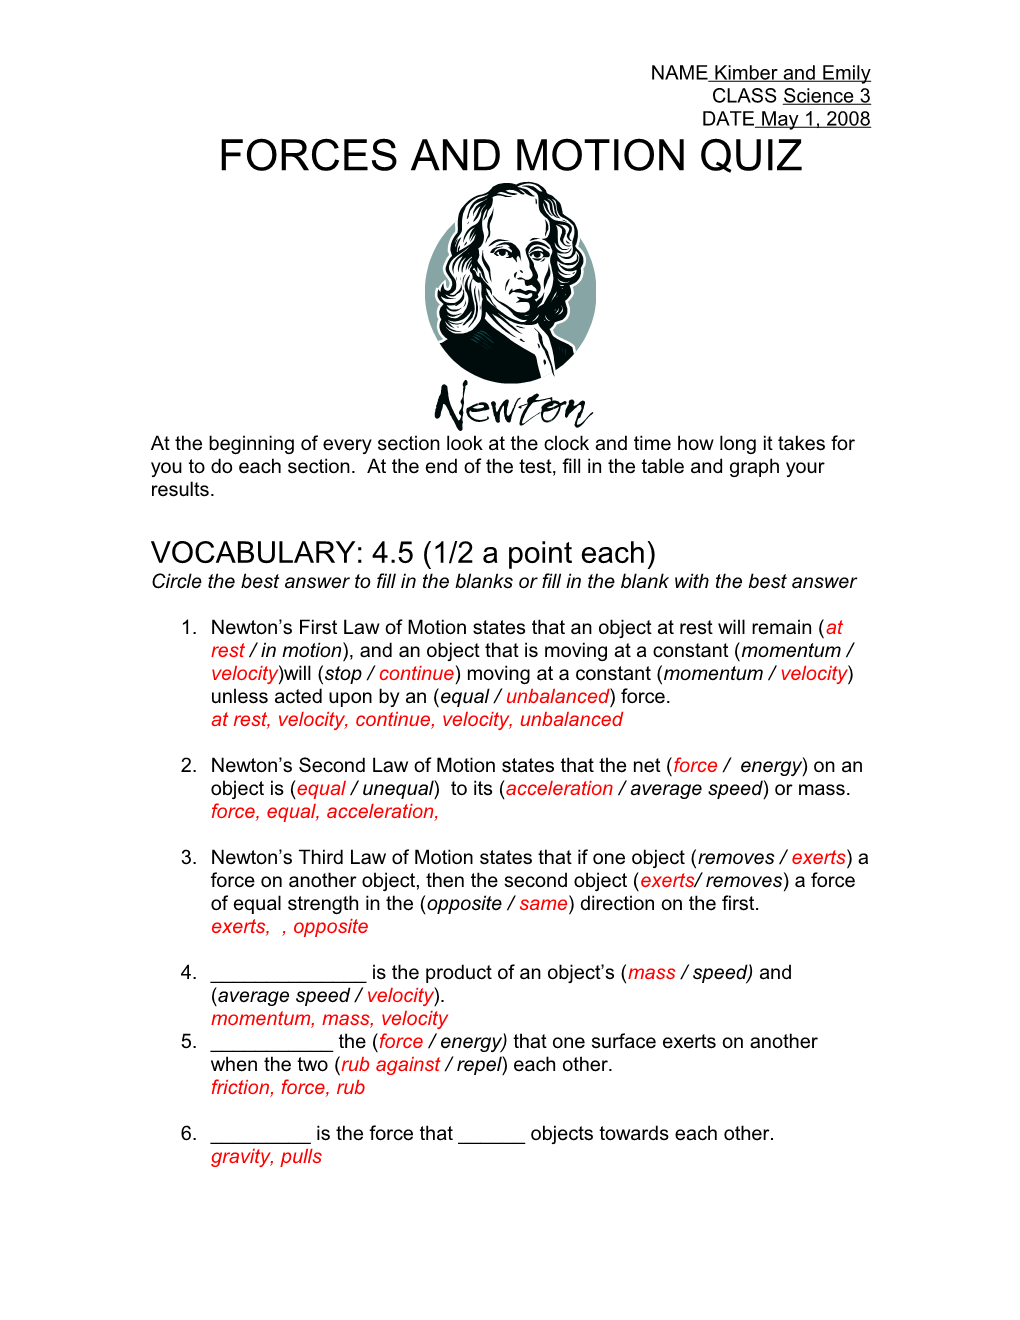 Forces and Motion Quiz